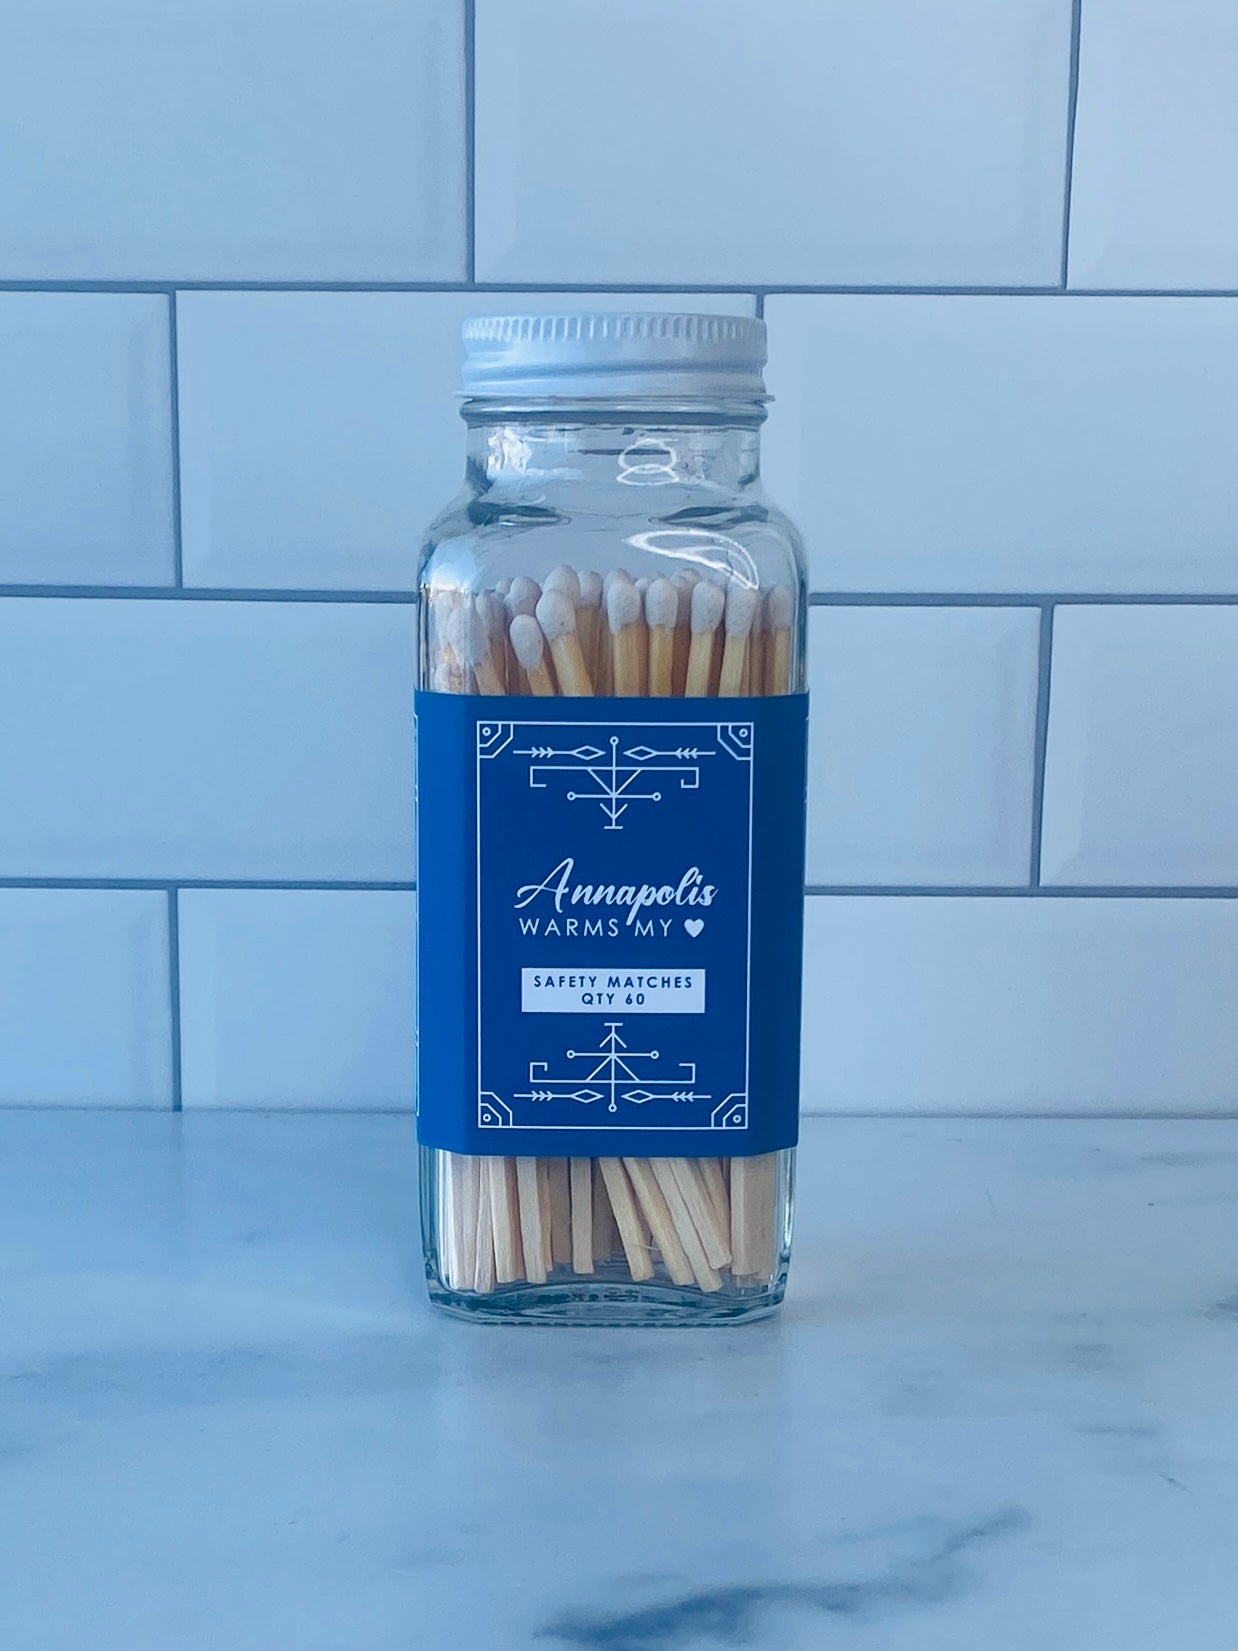 Annapolis Safety Matches - Annapolis Warms My Heart